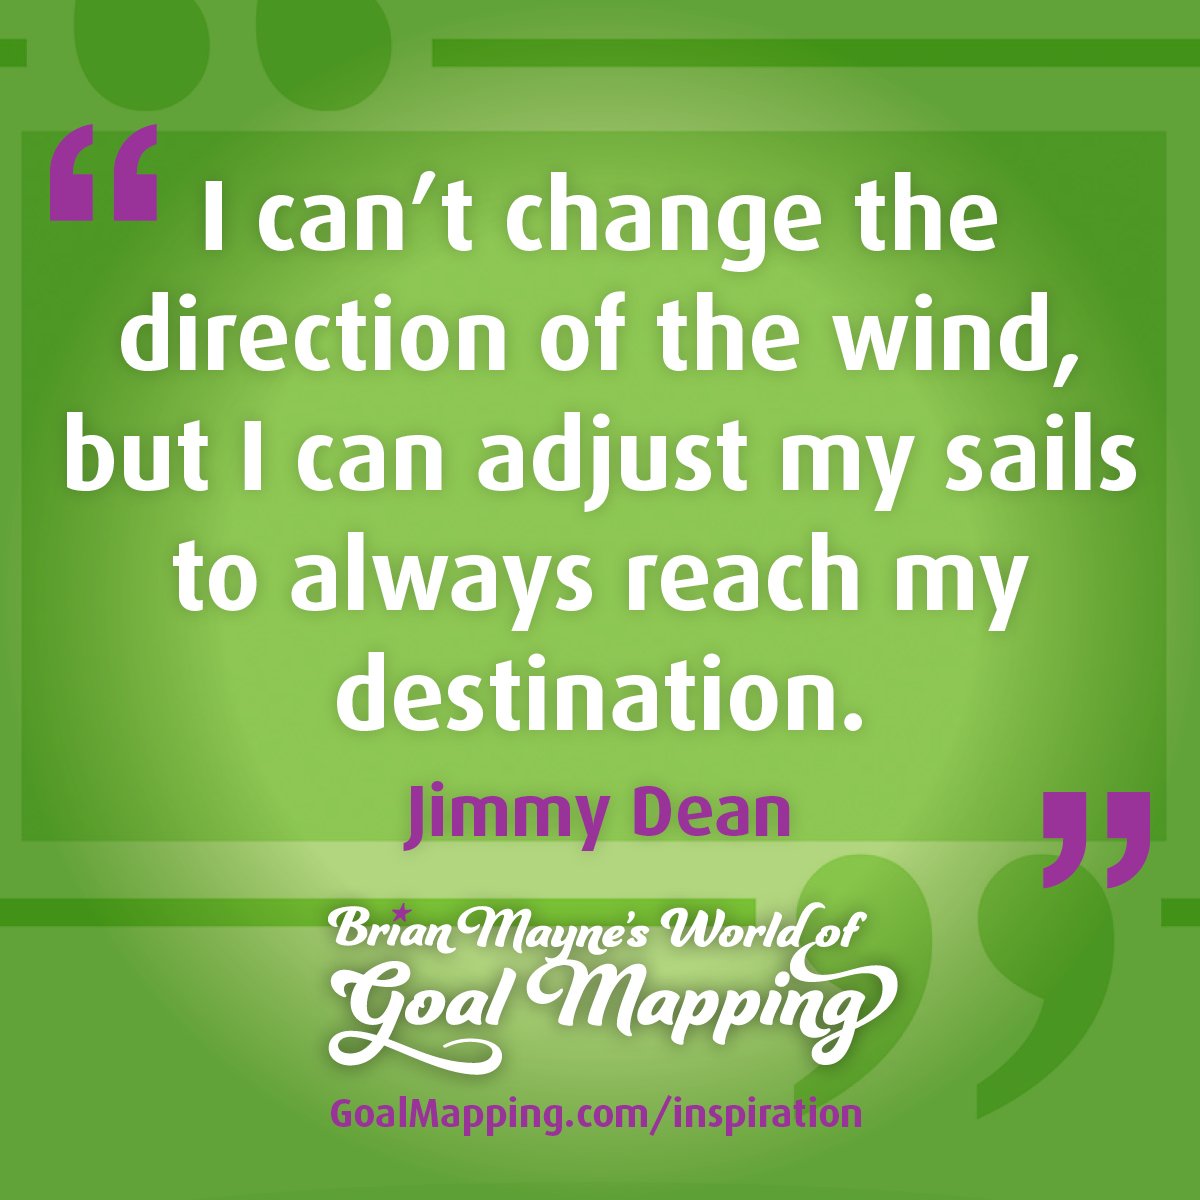 "I can’t change the direction of the wind, but I can adjust my sails to always reach my destination." Jimmy Dean